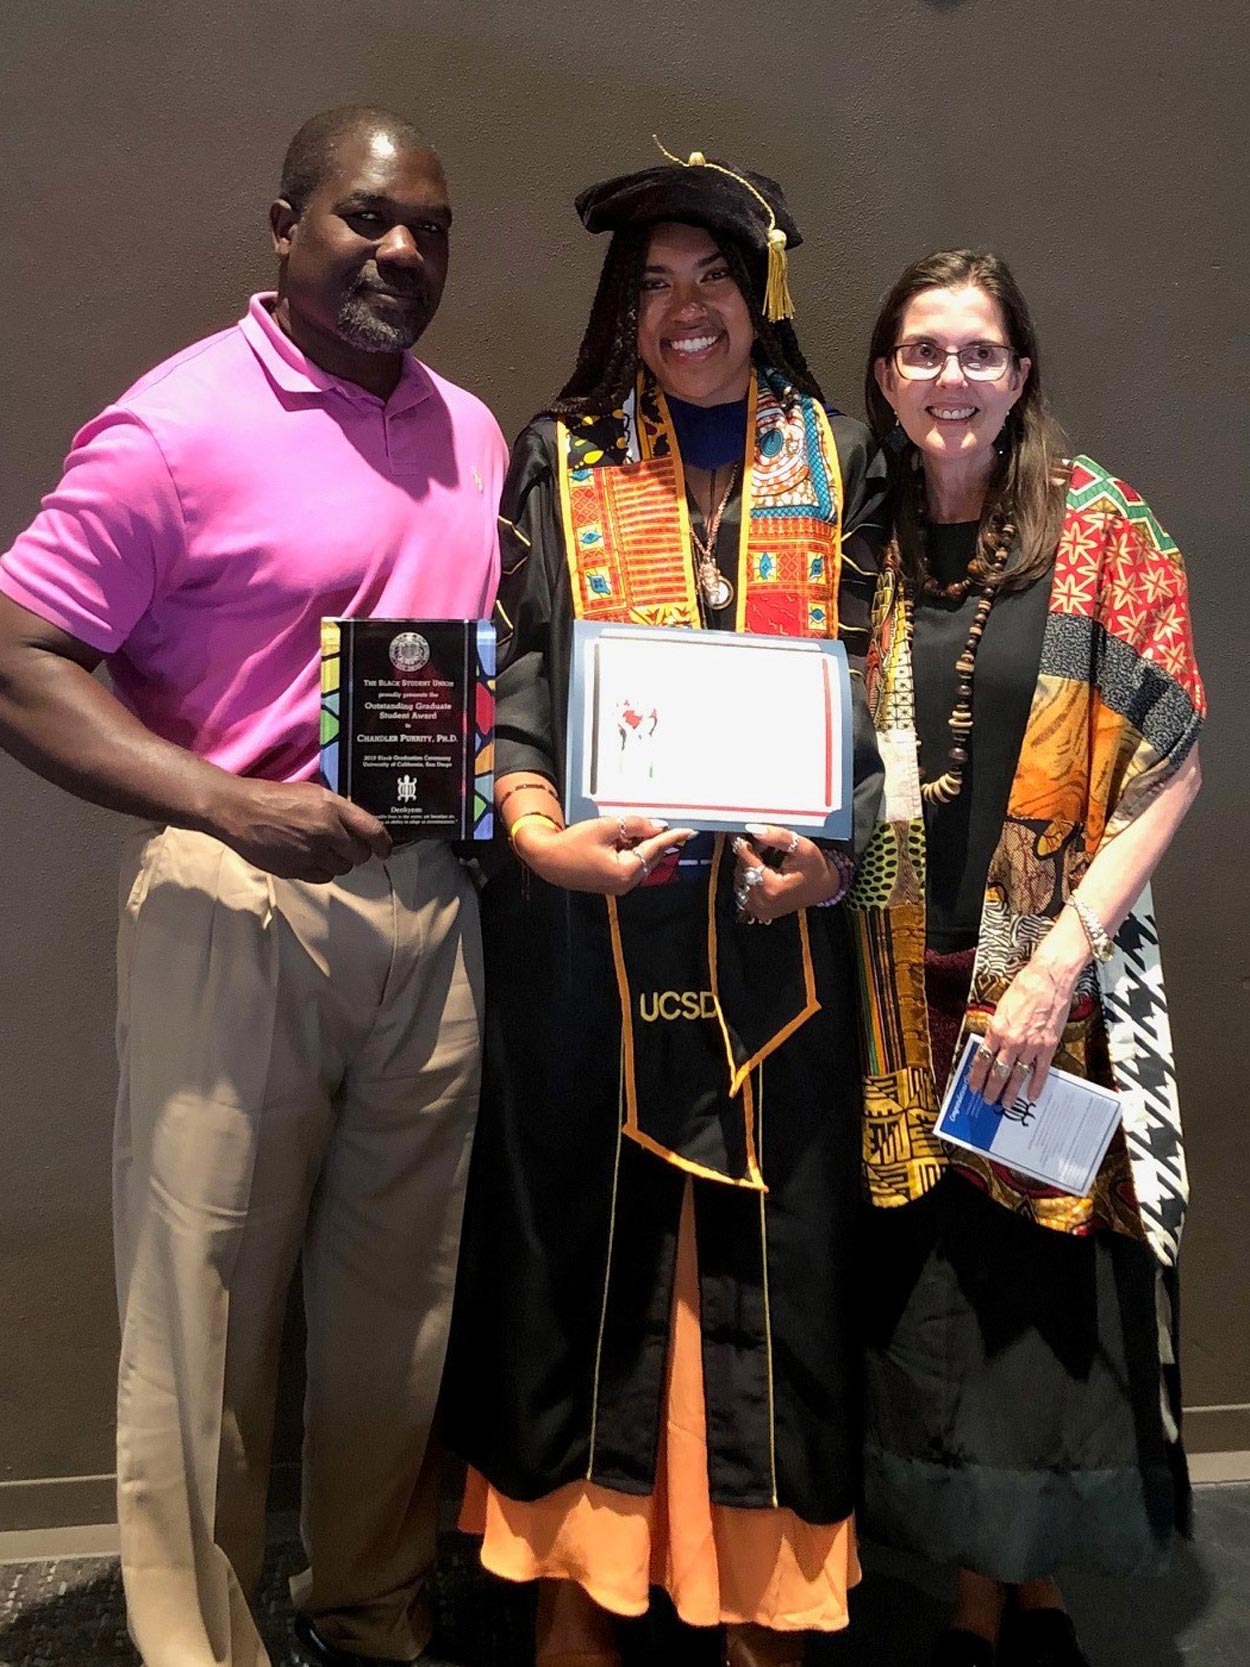 Chandler Puritty standing with her parents after receiving the 2019 Black Student Union's Outstanding Graduate Student Award.